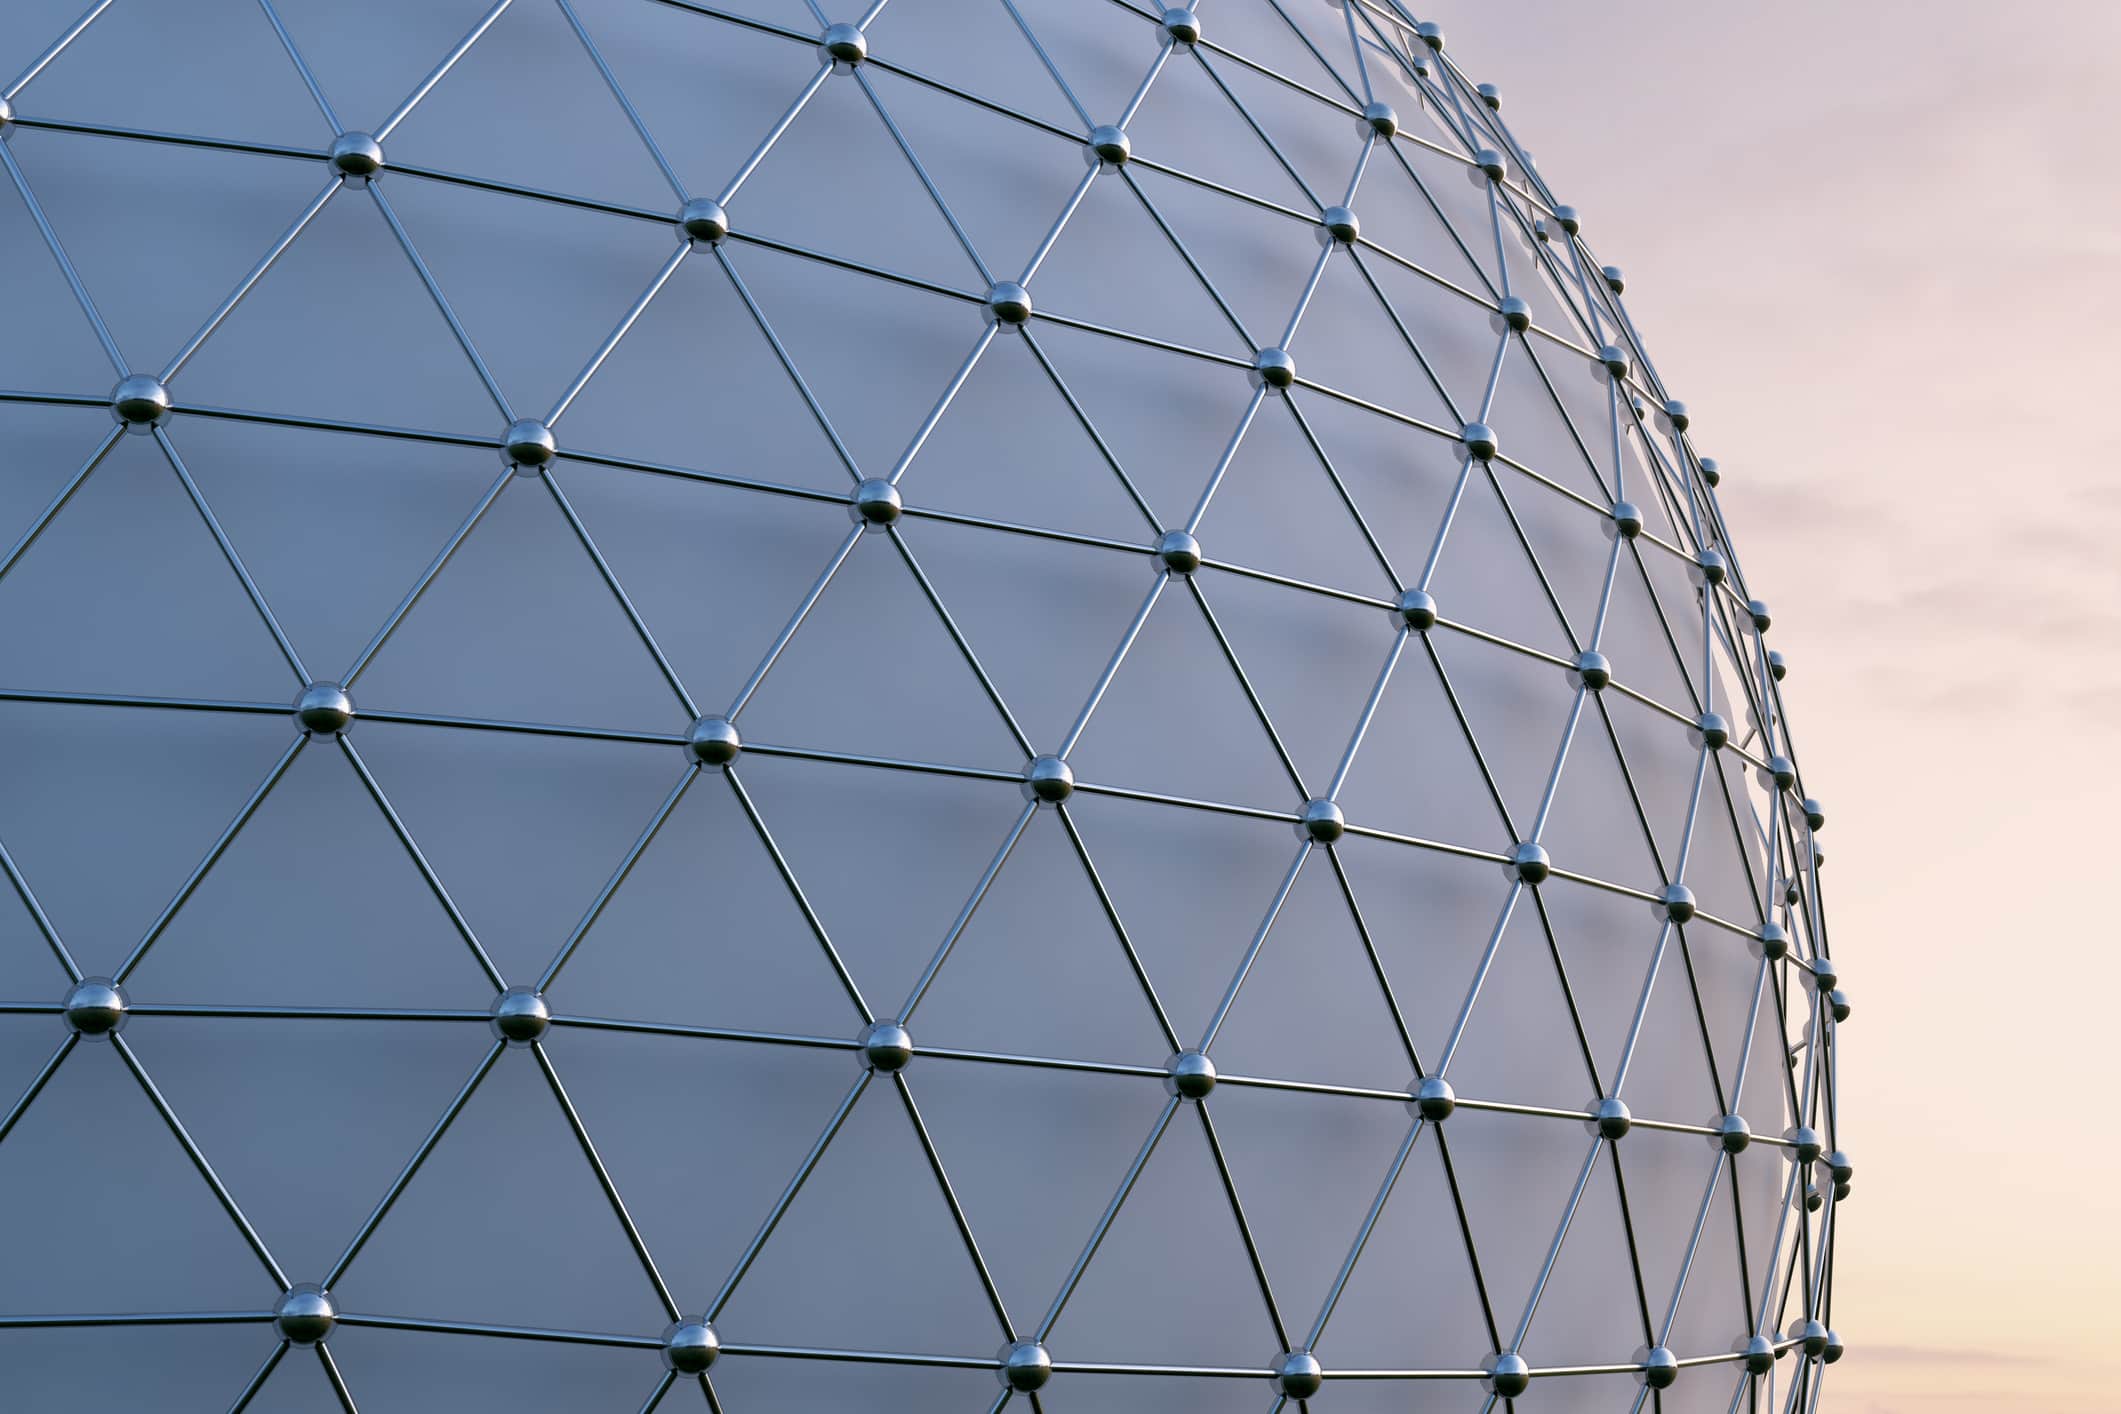 A large spherical structure or building with a metal scaffolding cover.